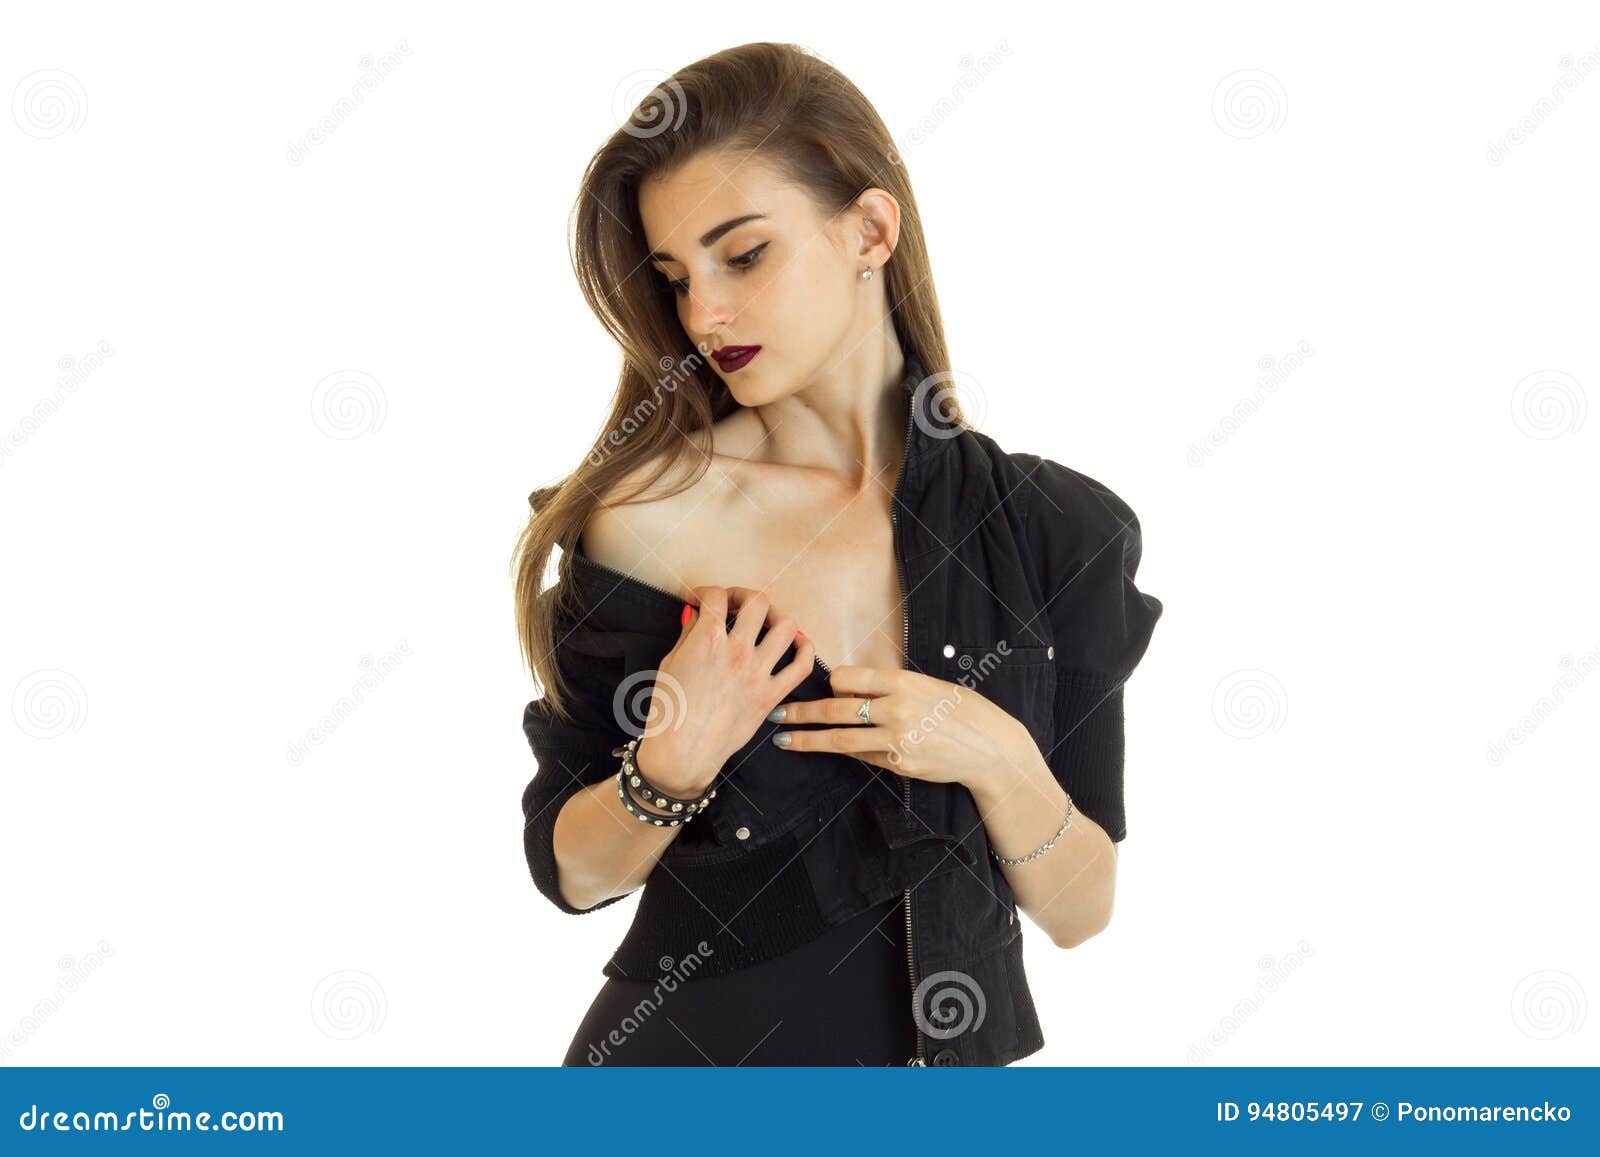 Woman Shirt Without Bra Isolated Stock Photo 11244337 Shutterstock